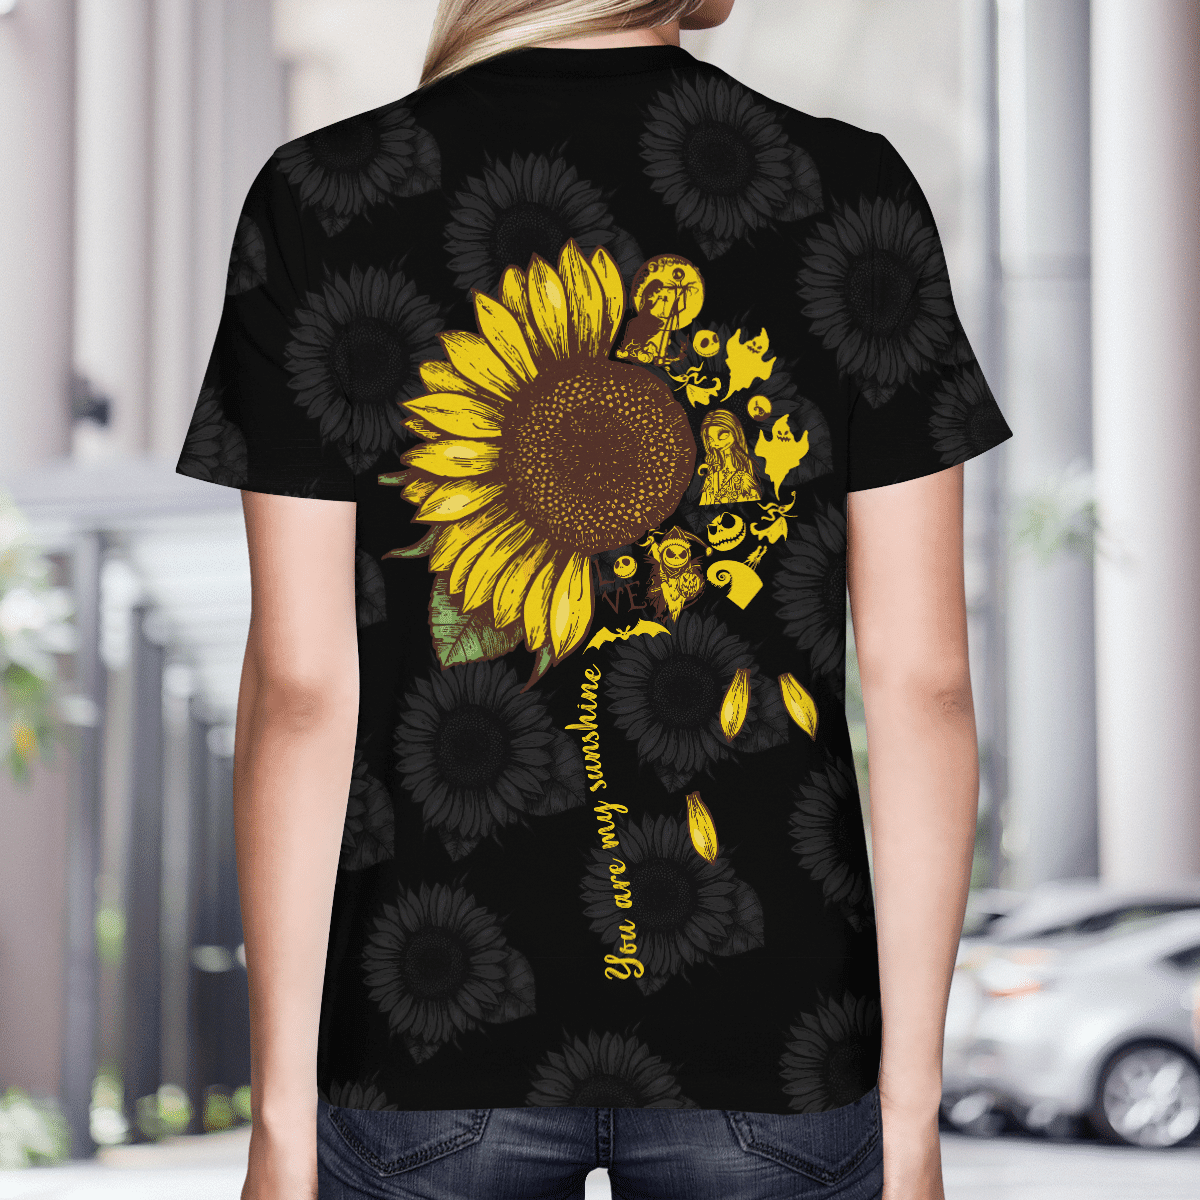 Sunflowers Hollow Out Tank Top & Leggings